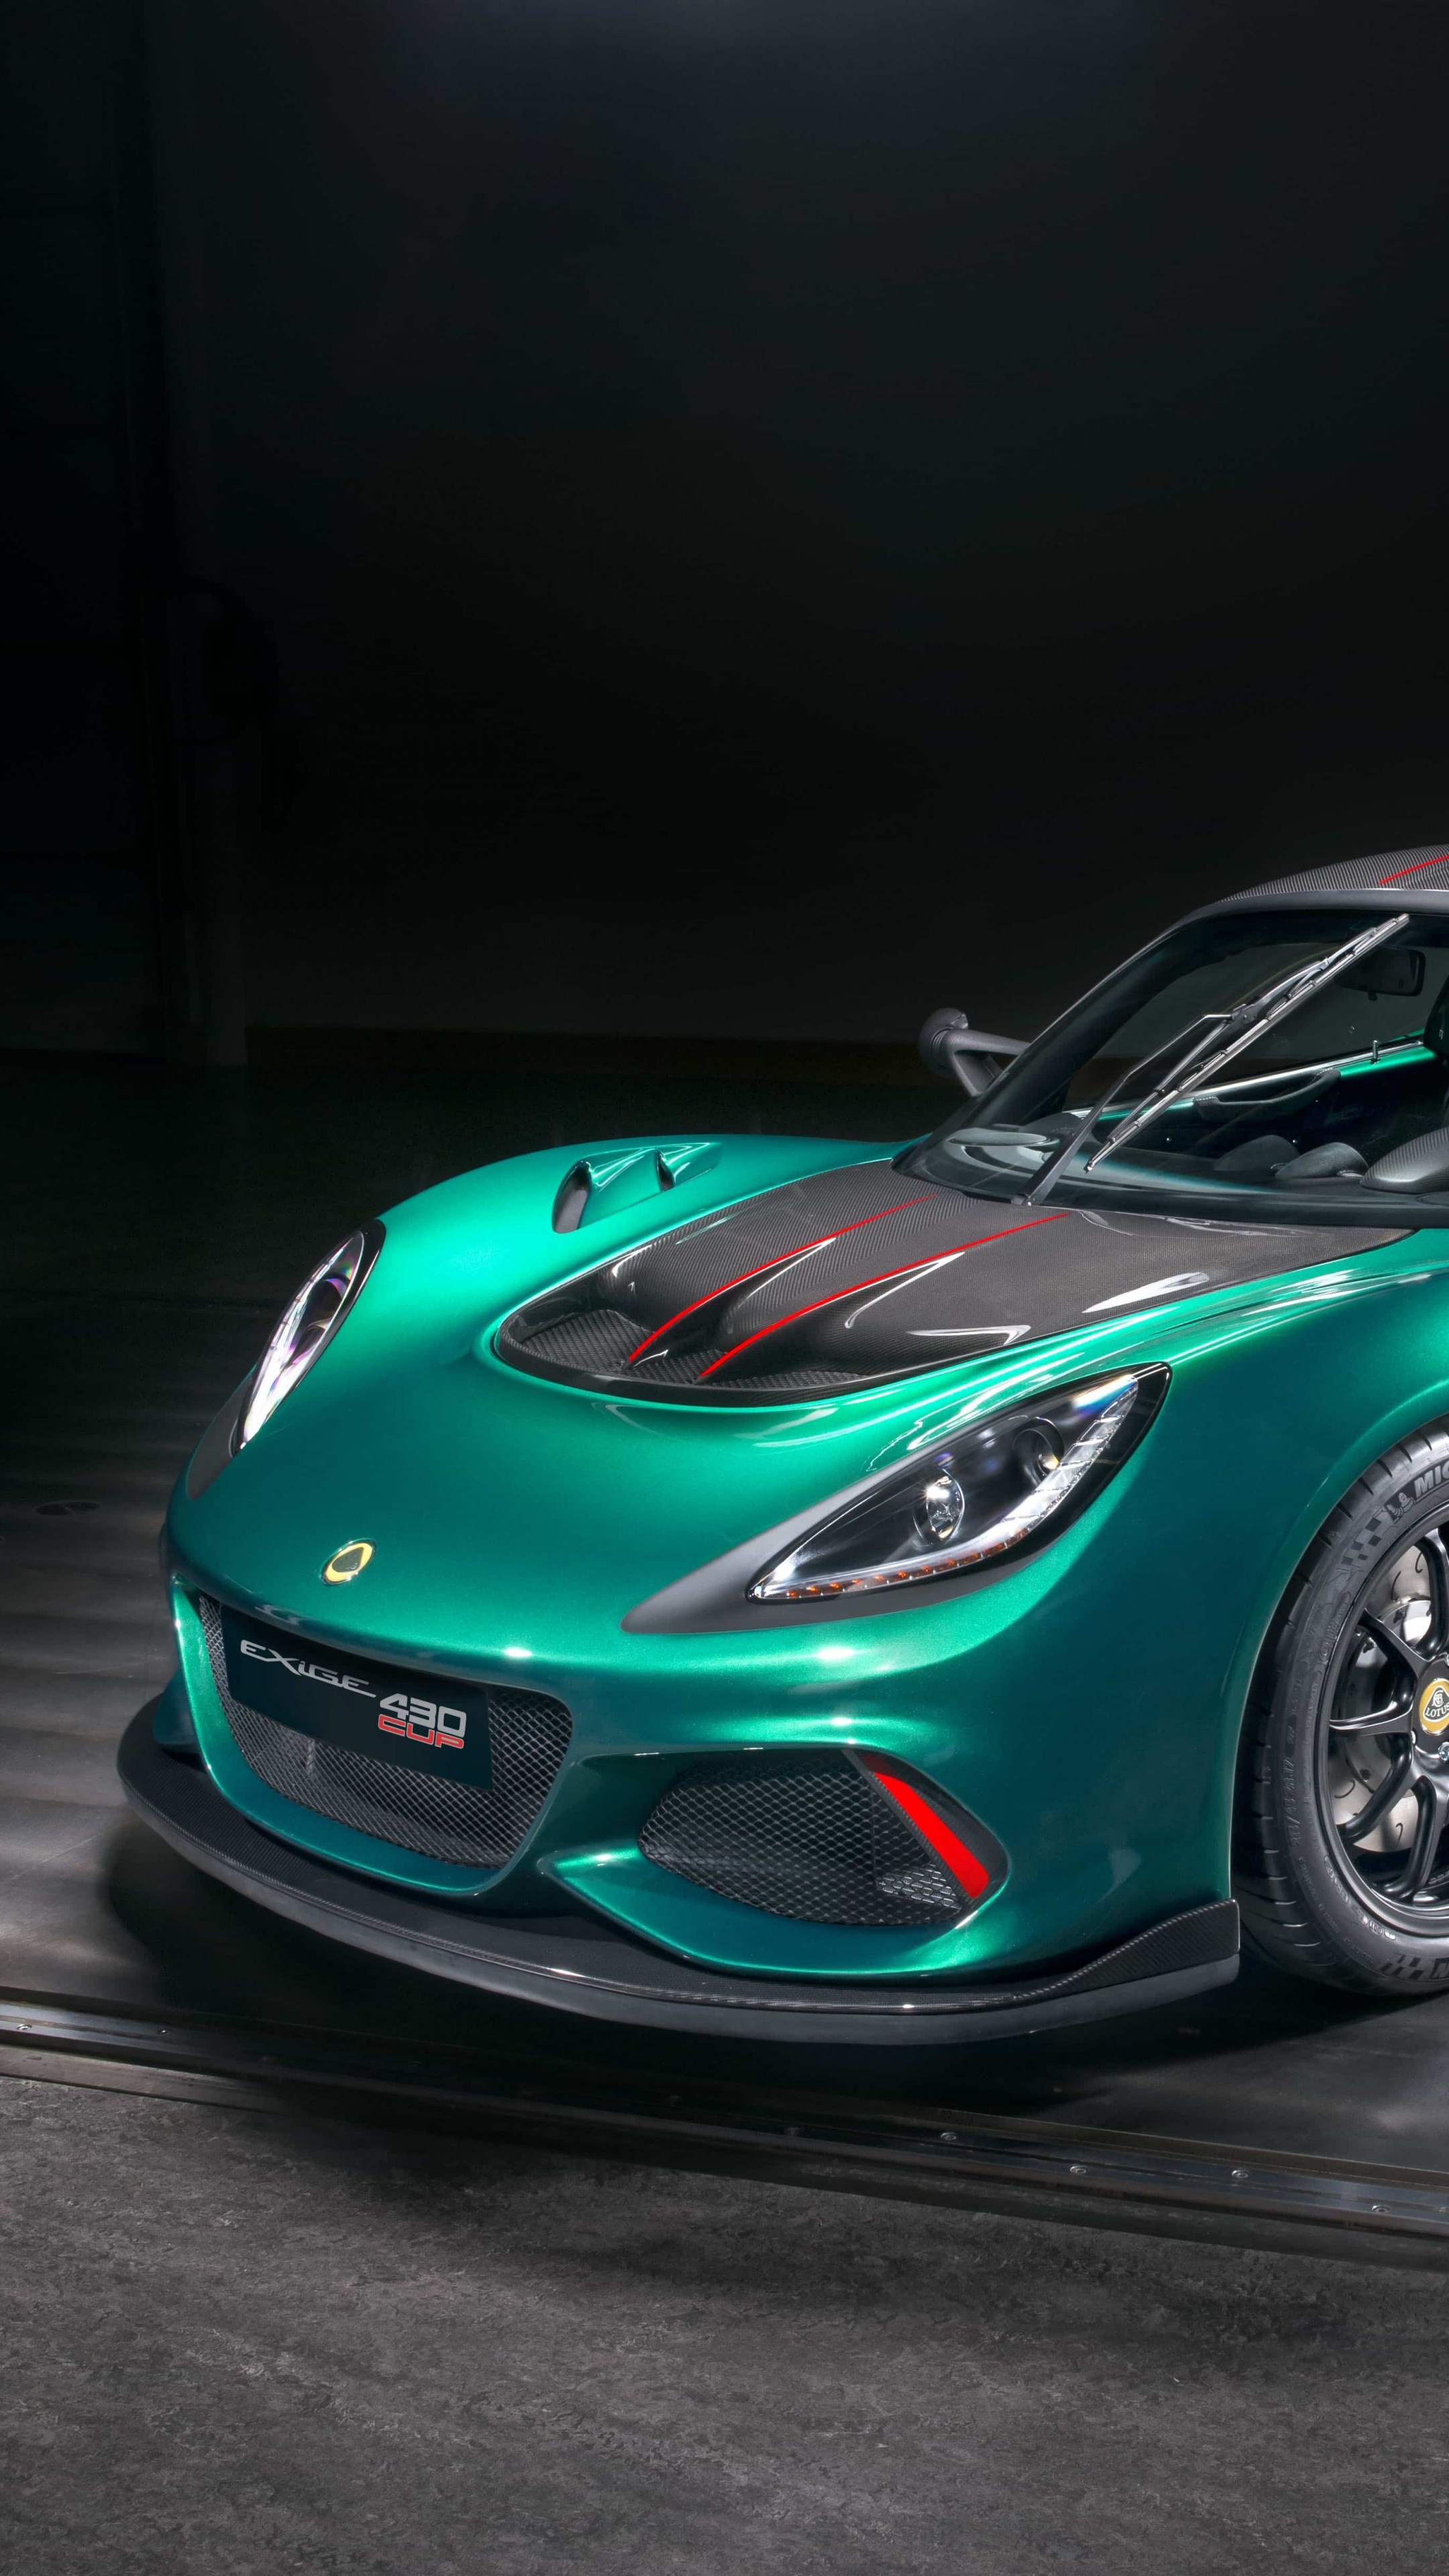 Lotus Exige Cup 430 2018, Breathtaking beauty, Ultimate performance, Sports car perfection, 2160x3840 4K Handy